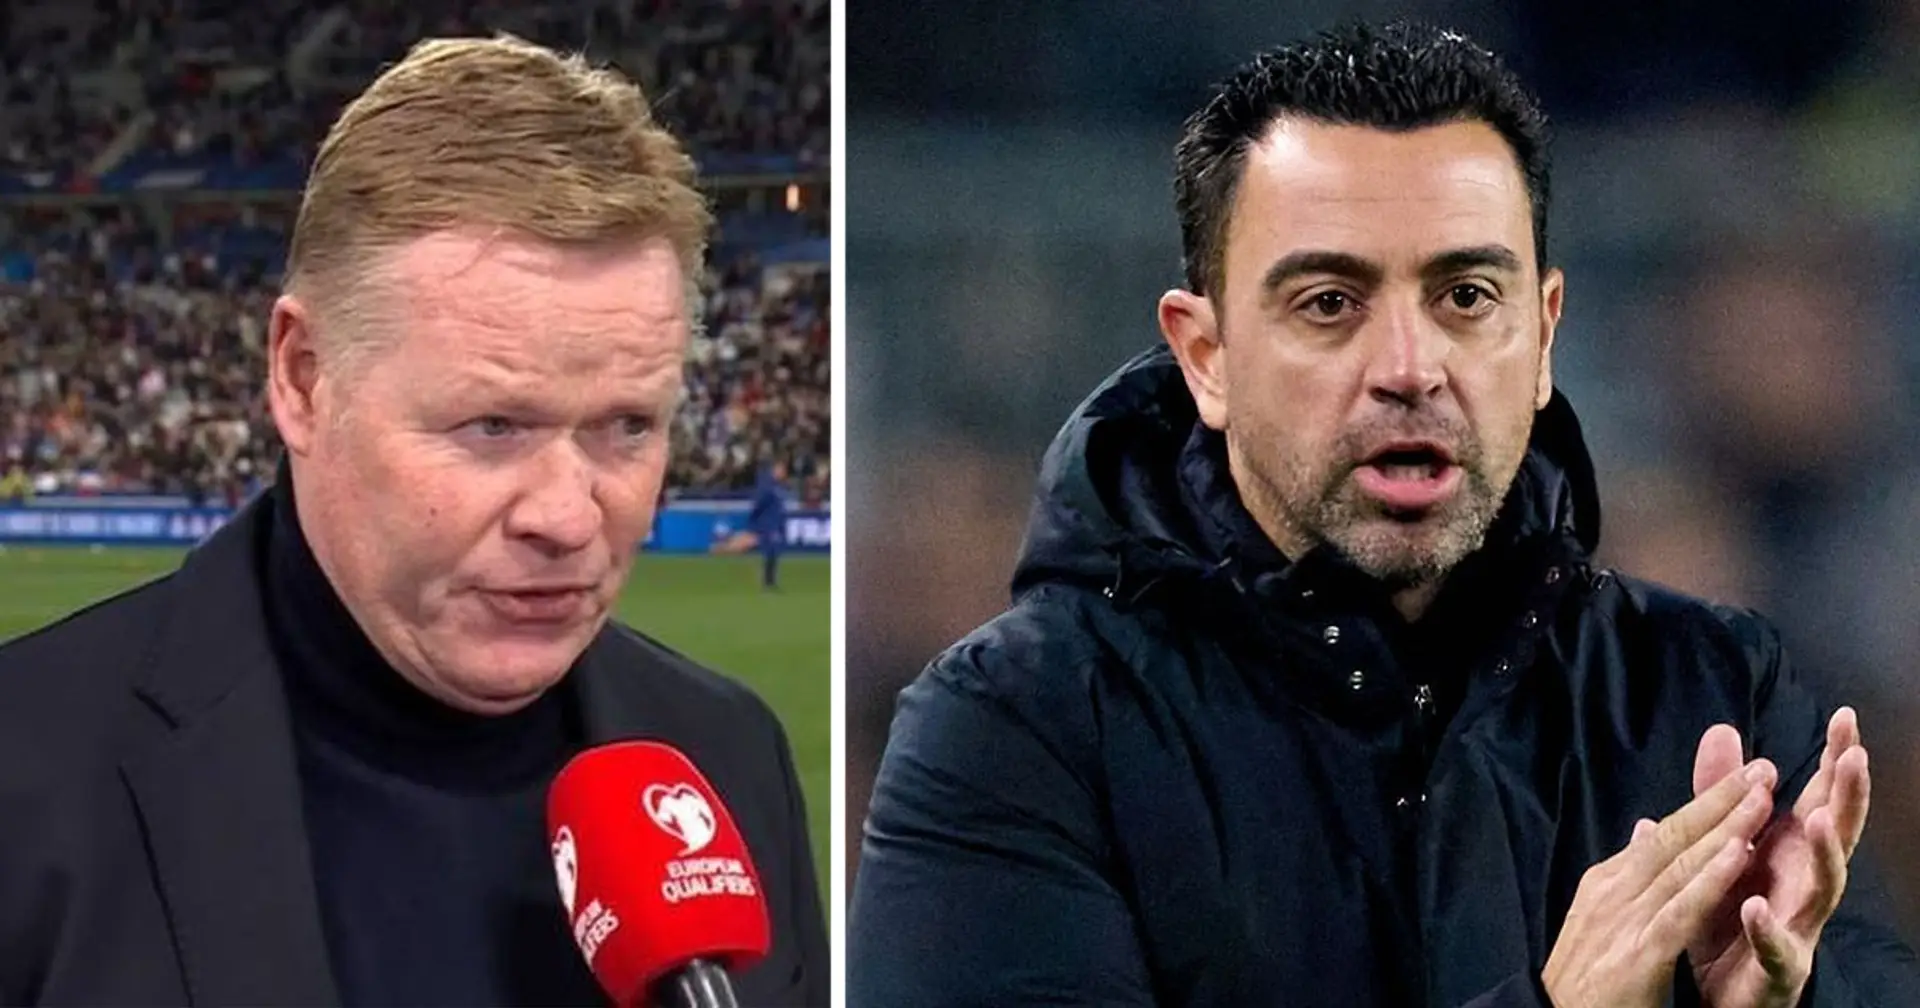 'Barca lives a lot in the past': Koeman speaks in favour of defensive approach